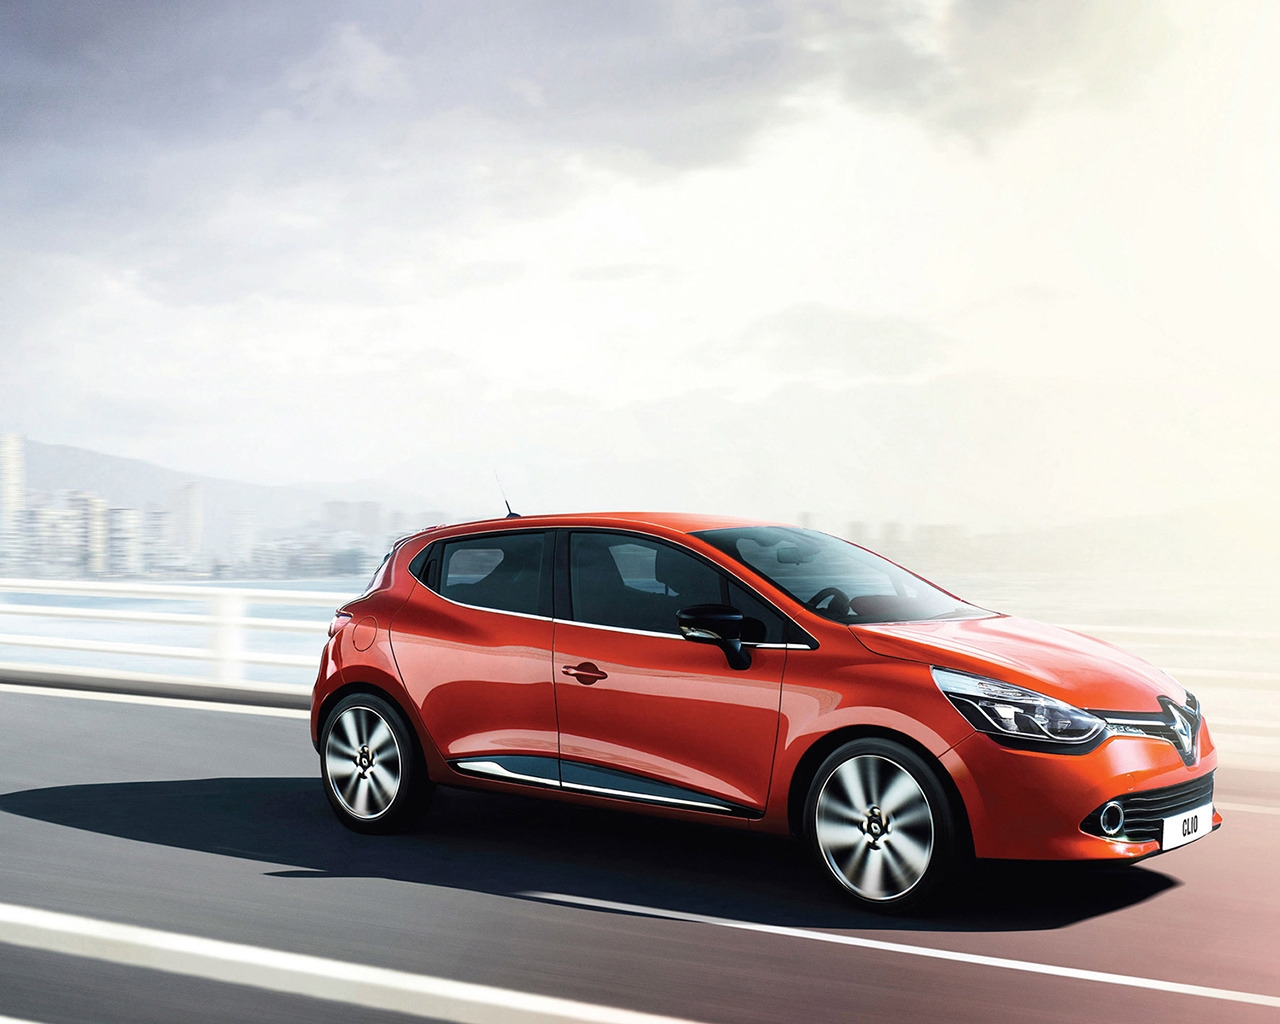 Cool Renault Clio 2013 for 1280 x 1024 resolution